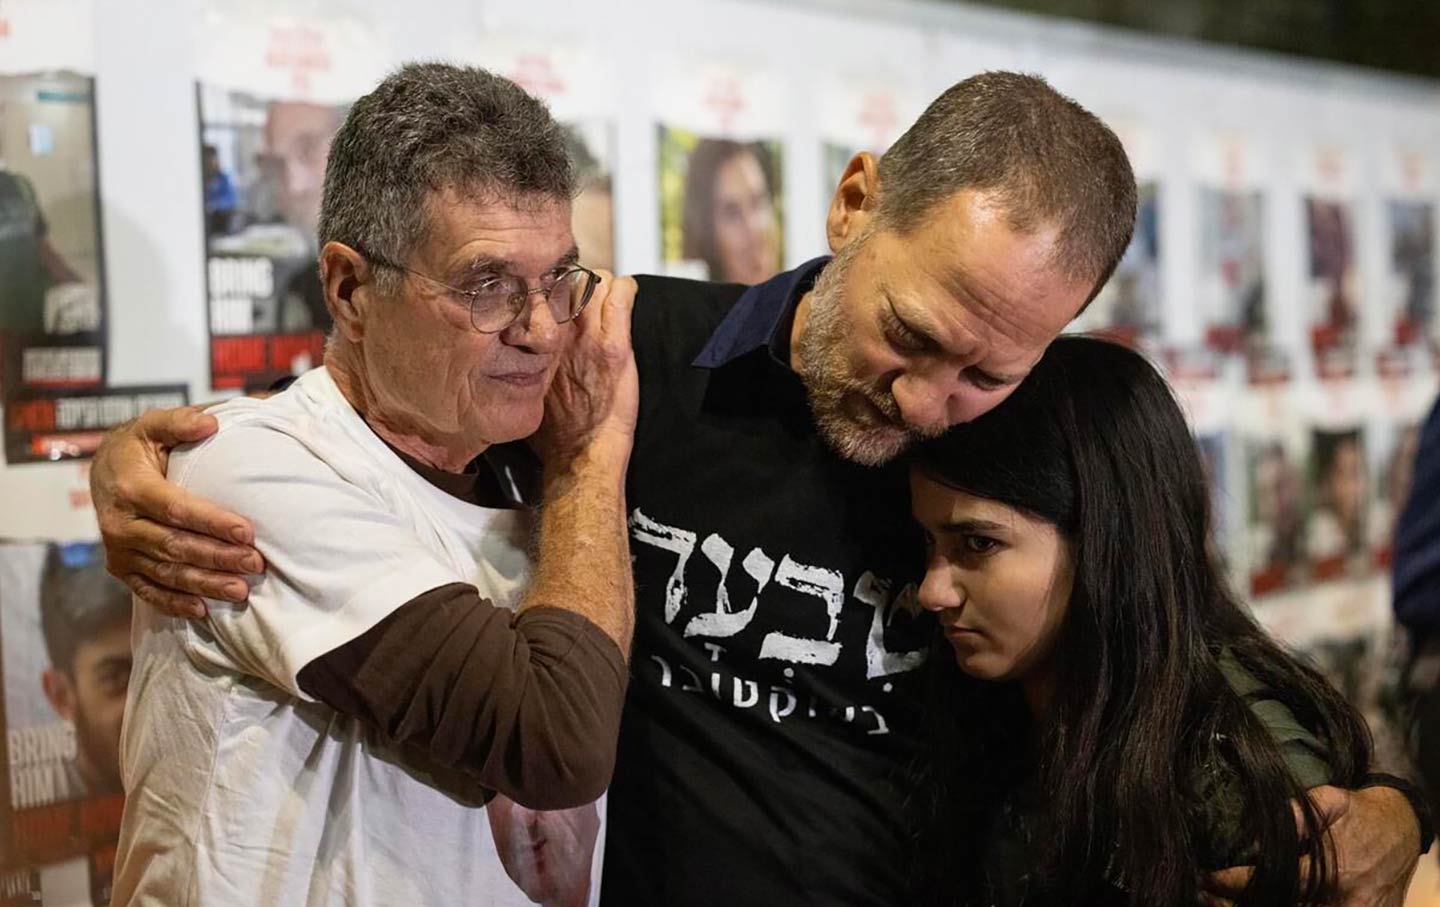 Yaacov Godo (left) and Maoz Inon (center) at a gathering of the families of hostages and survivors.